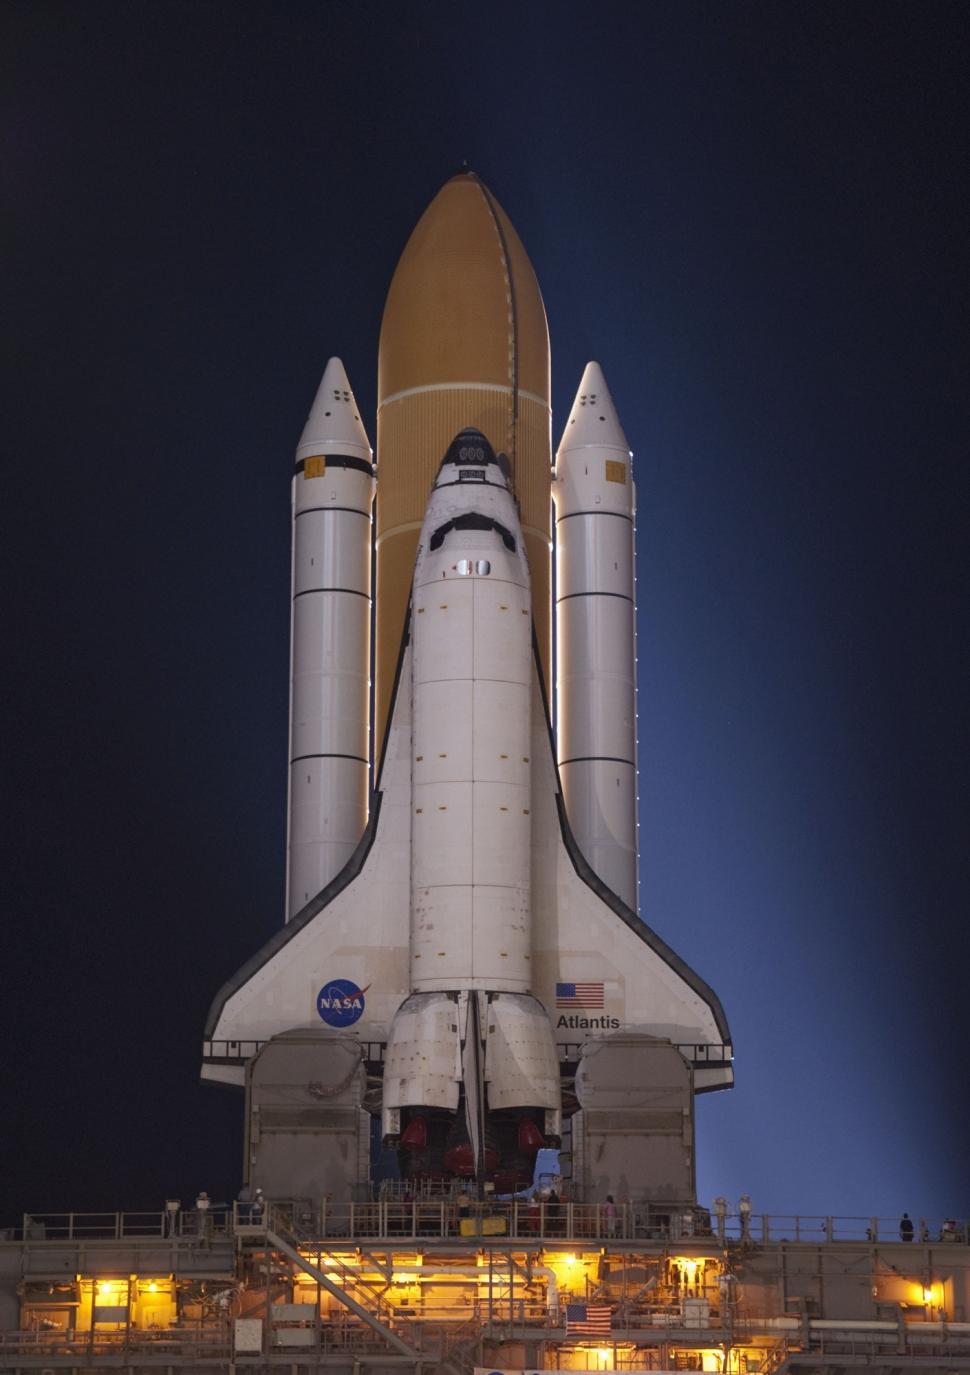 Free Image of Space Shuttle on Display at Museum 